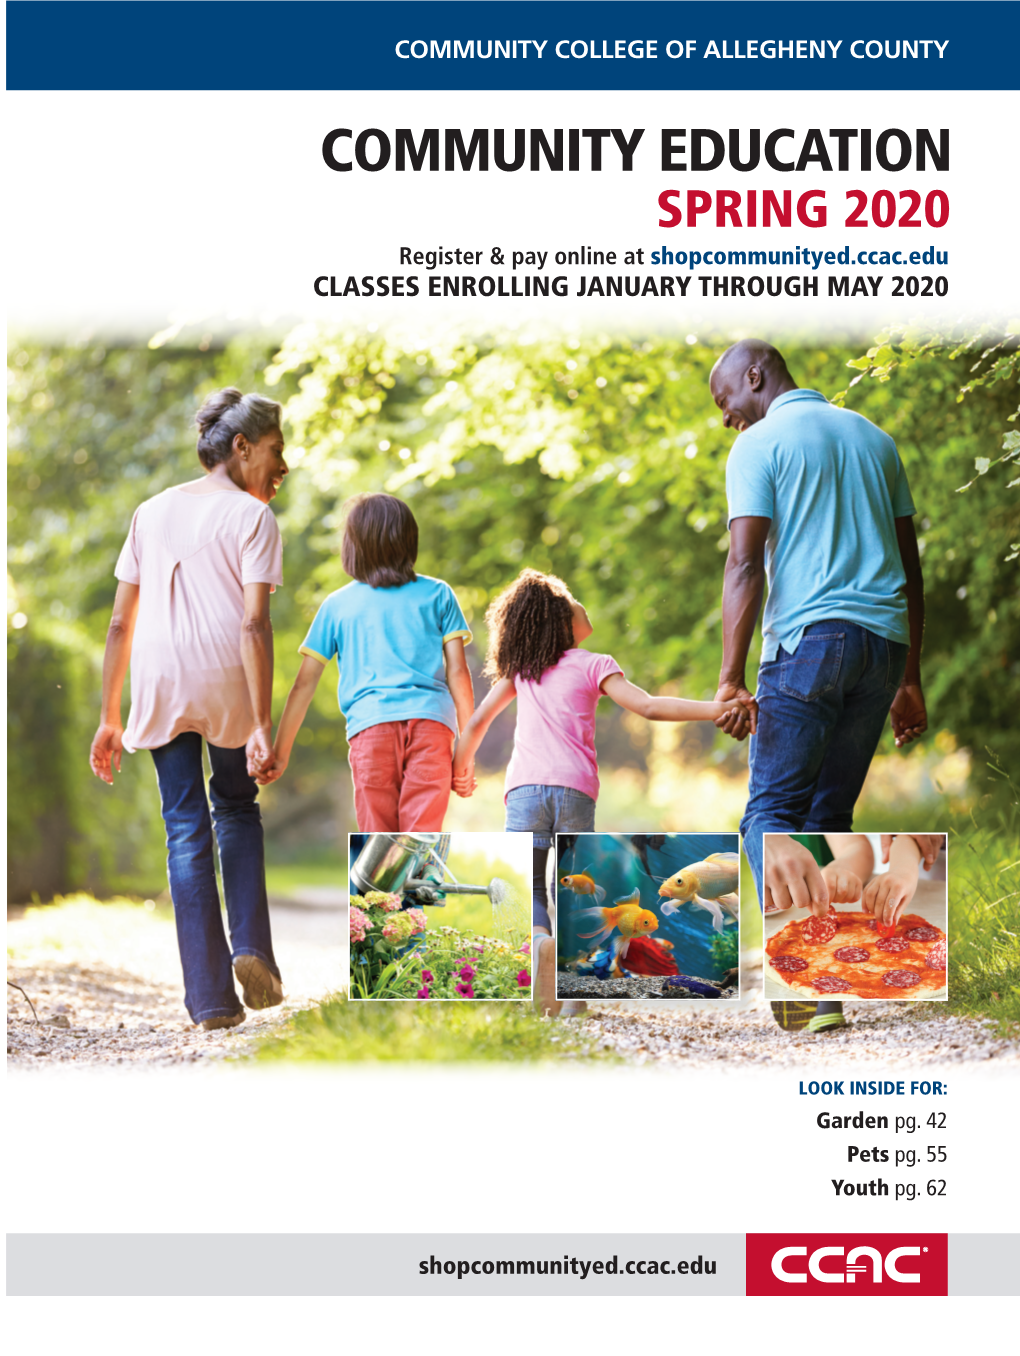 COMMUNITY EDUCATION SPRING 2020 Register & Pay Online at Shopcommunityed.Ccac.Edu CLASSES ENROLLING JANUARY THROUGH MAY 2020